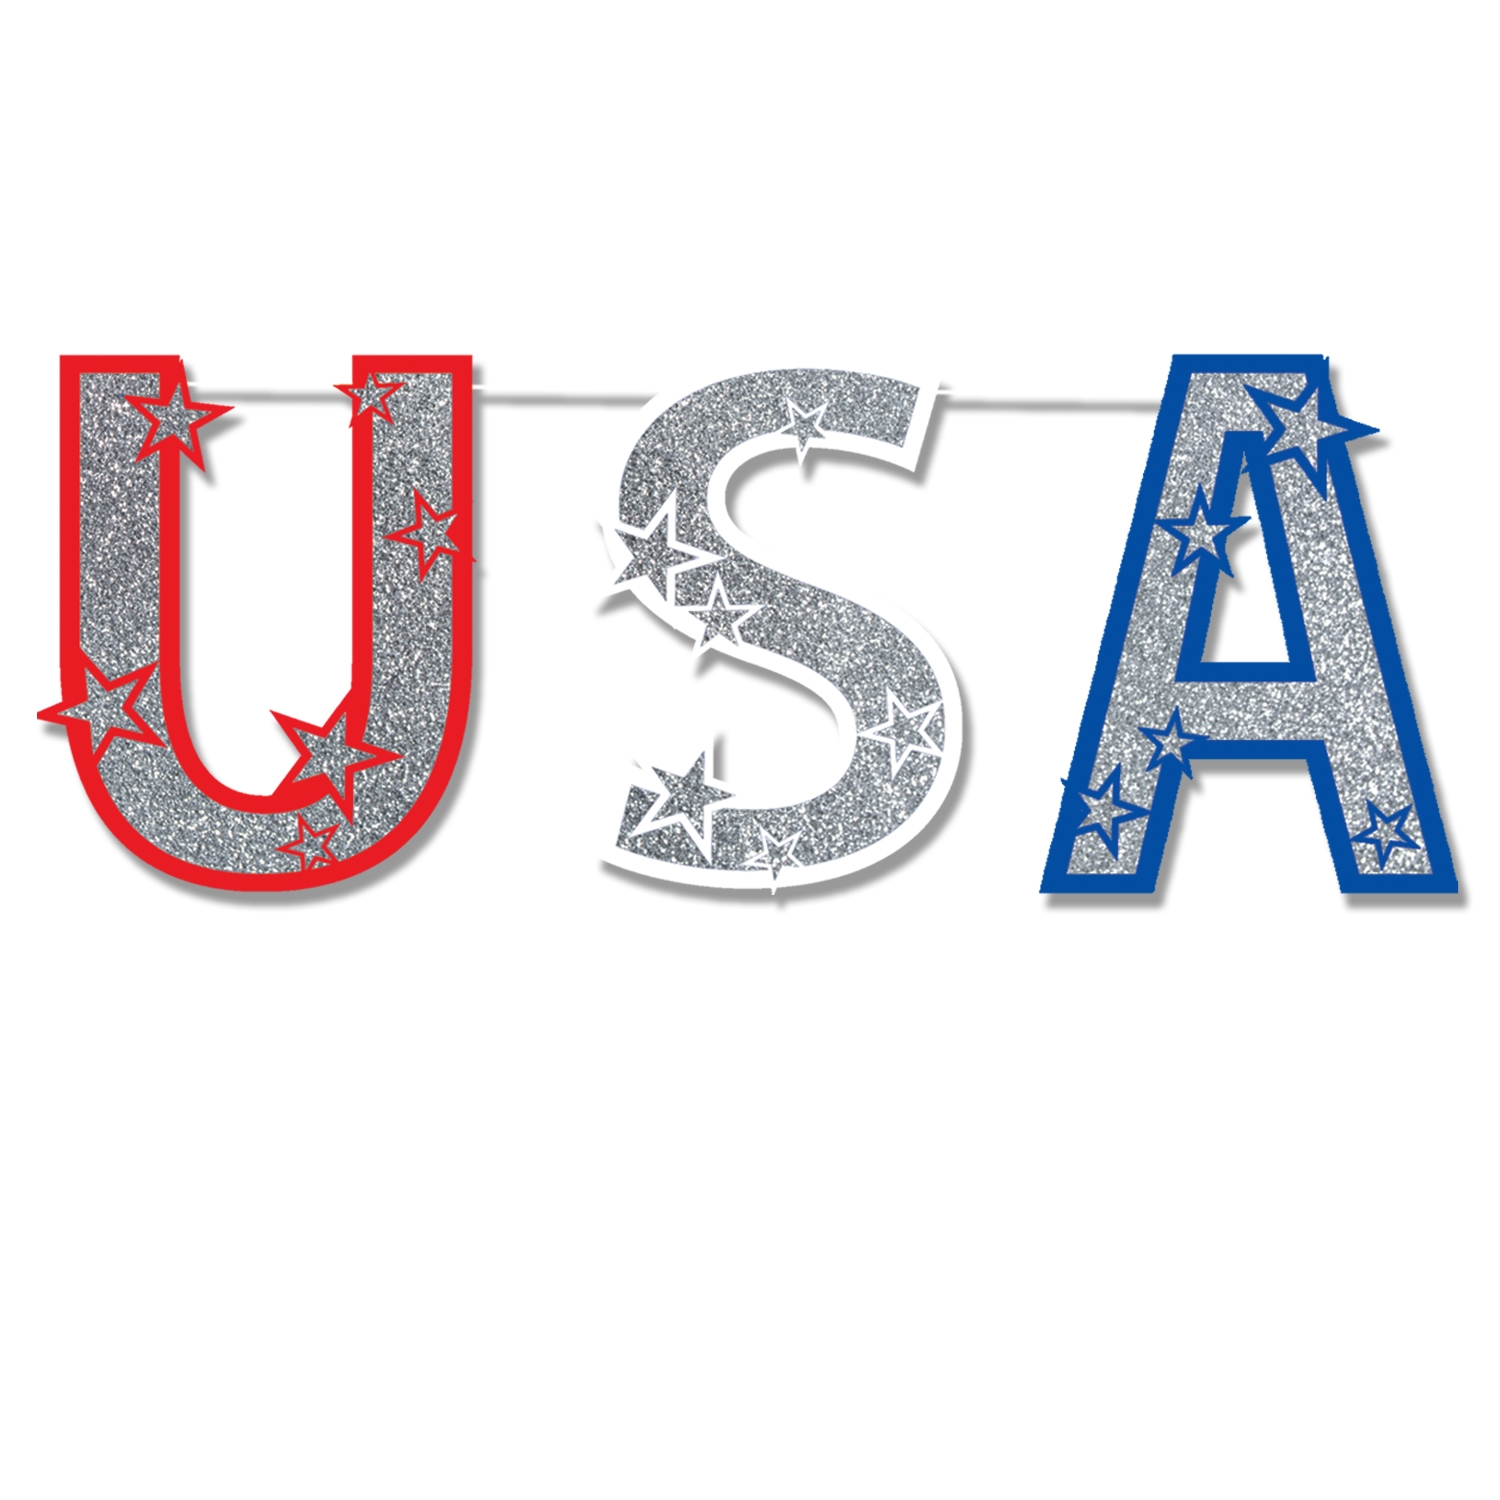 USA Glittered Streamer in red, white, and blue